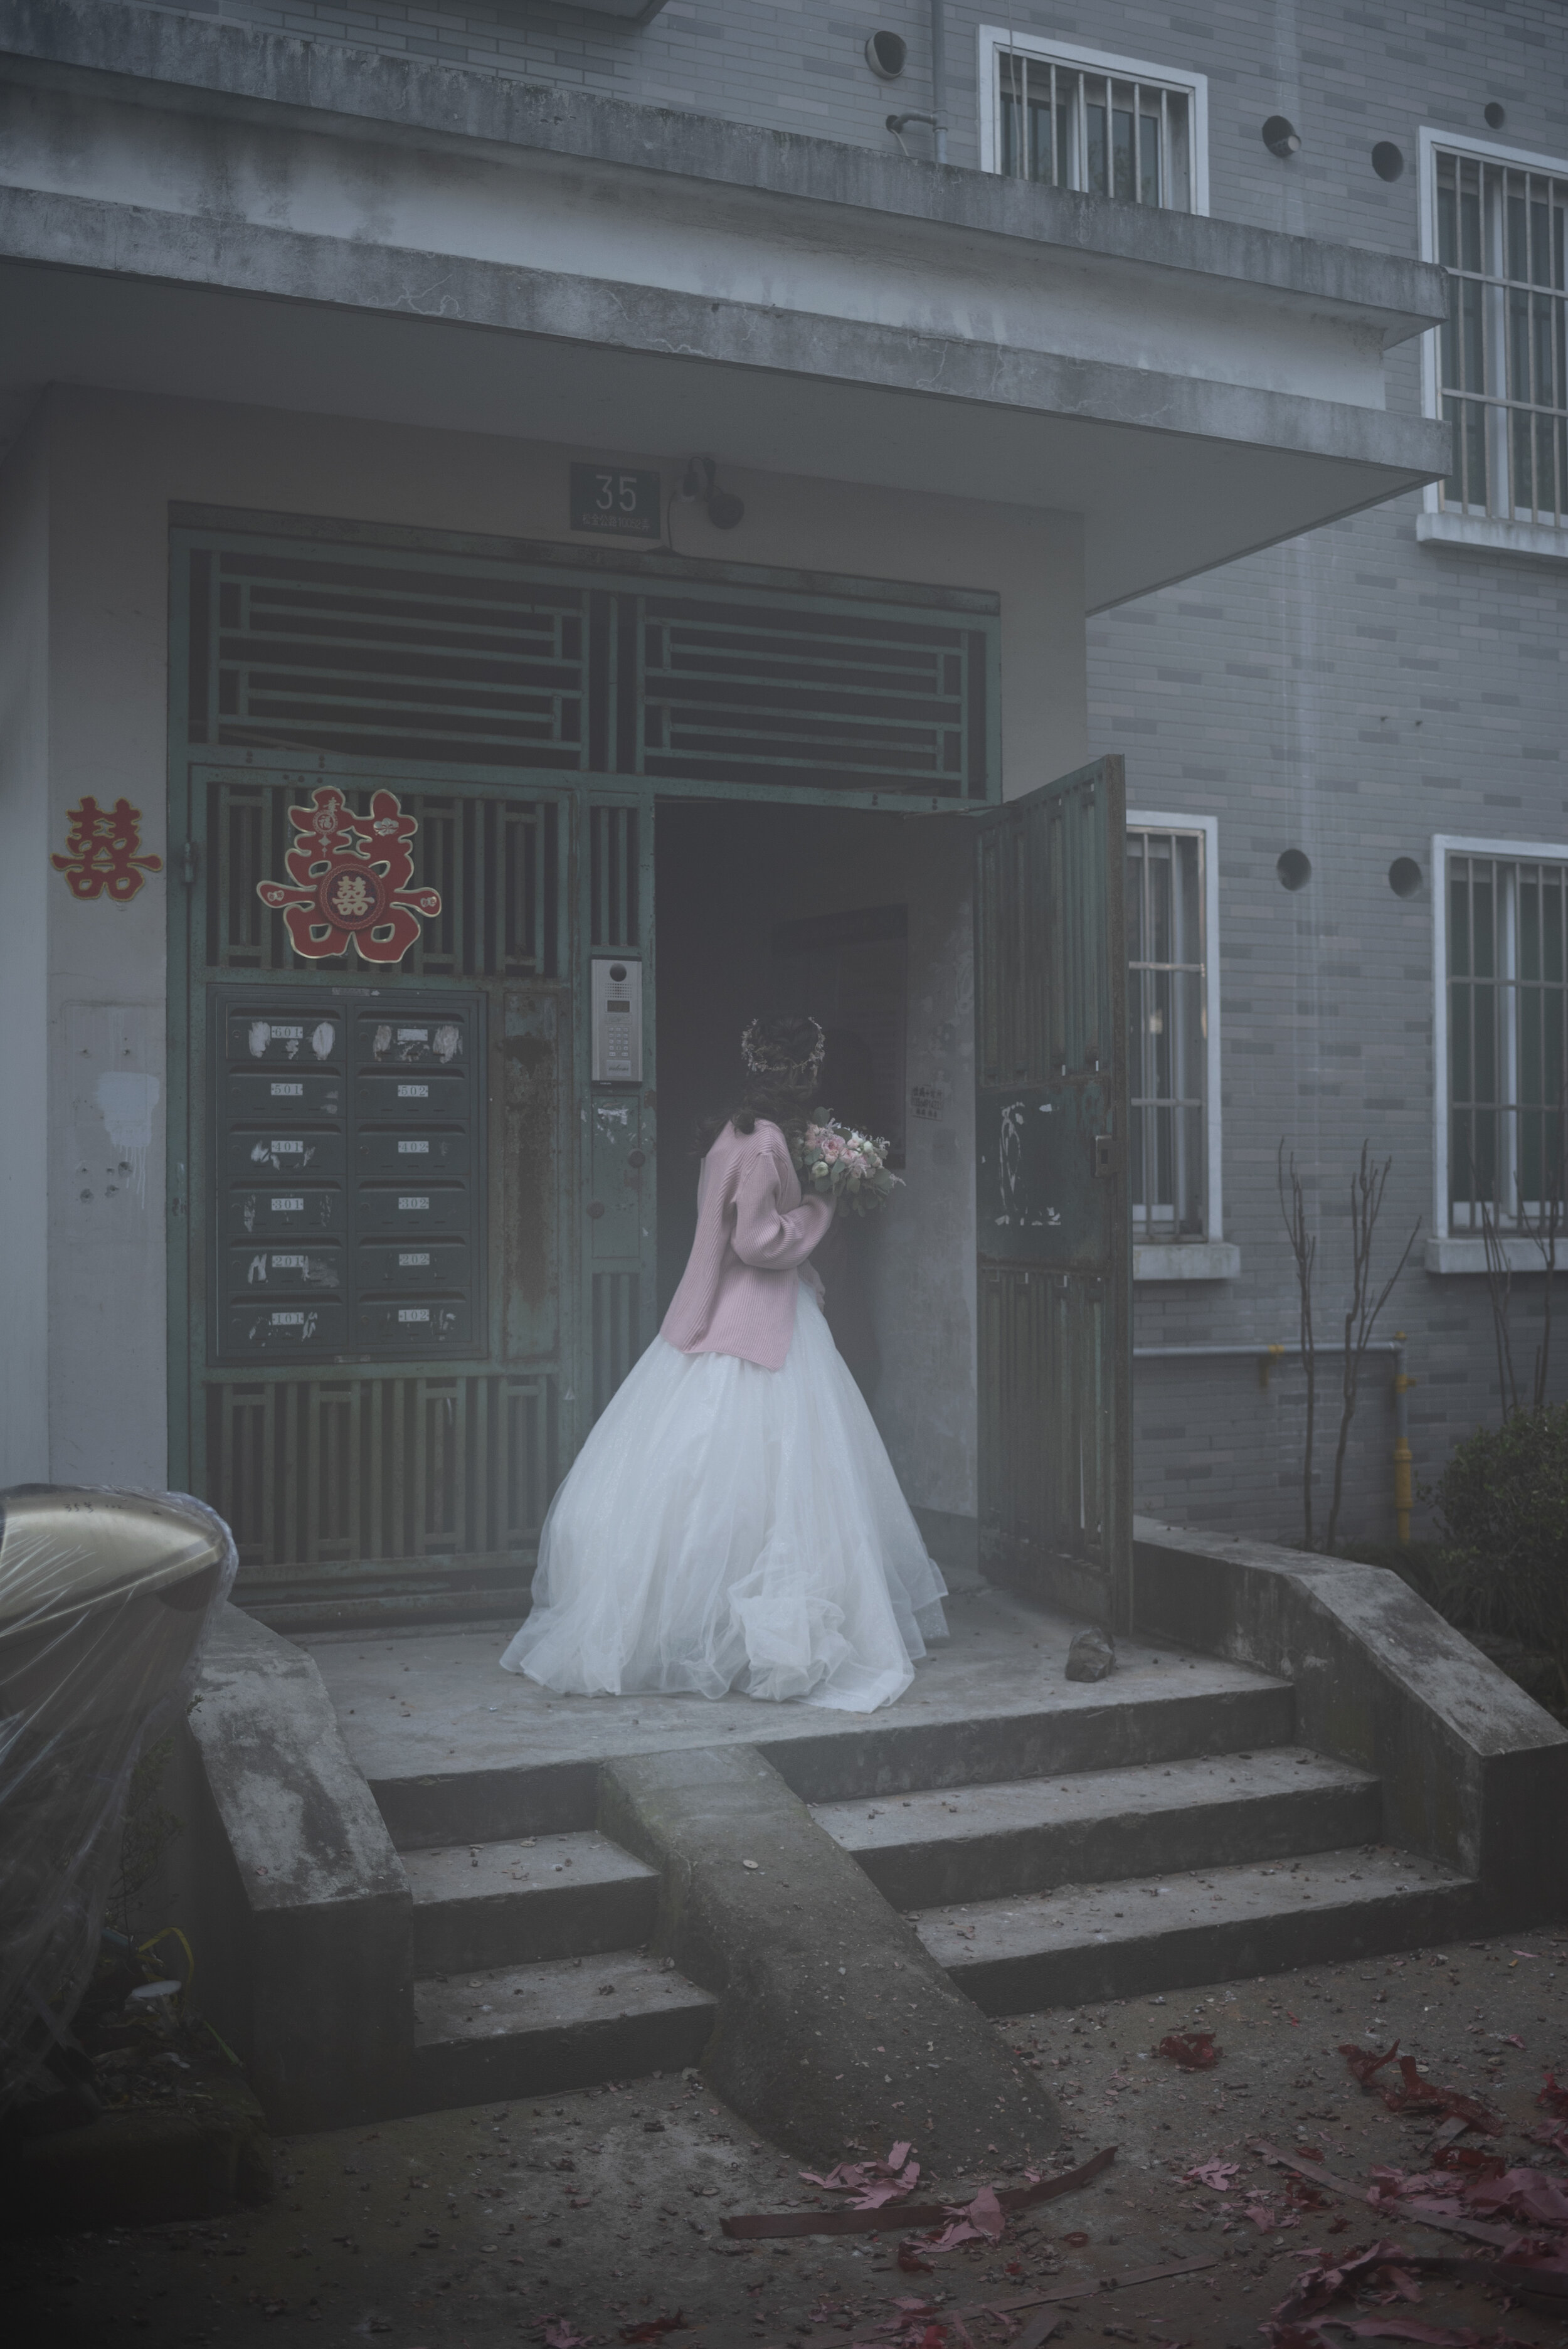  Li waiting for her fiancé in the outskirts of Shanghai. 2019. 